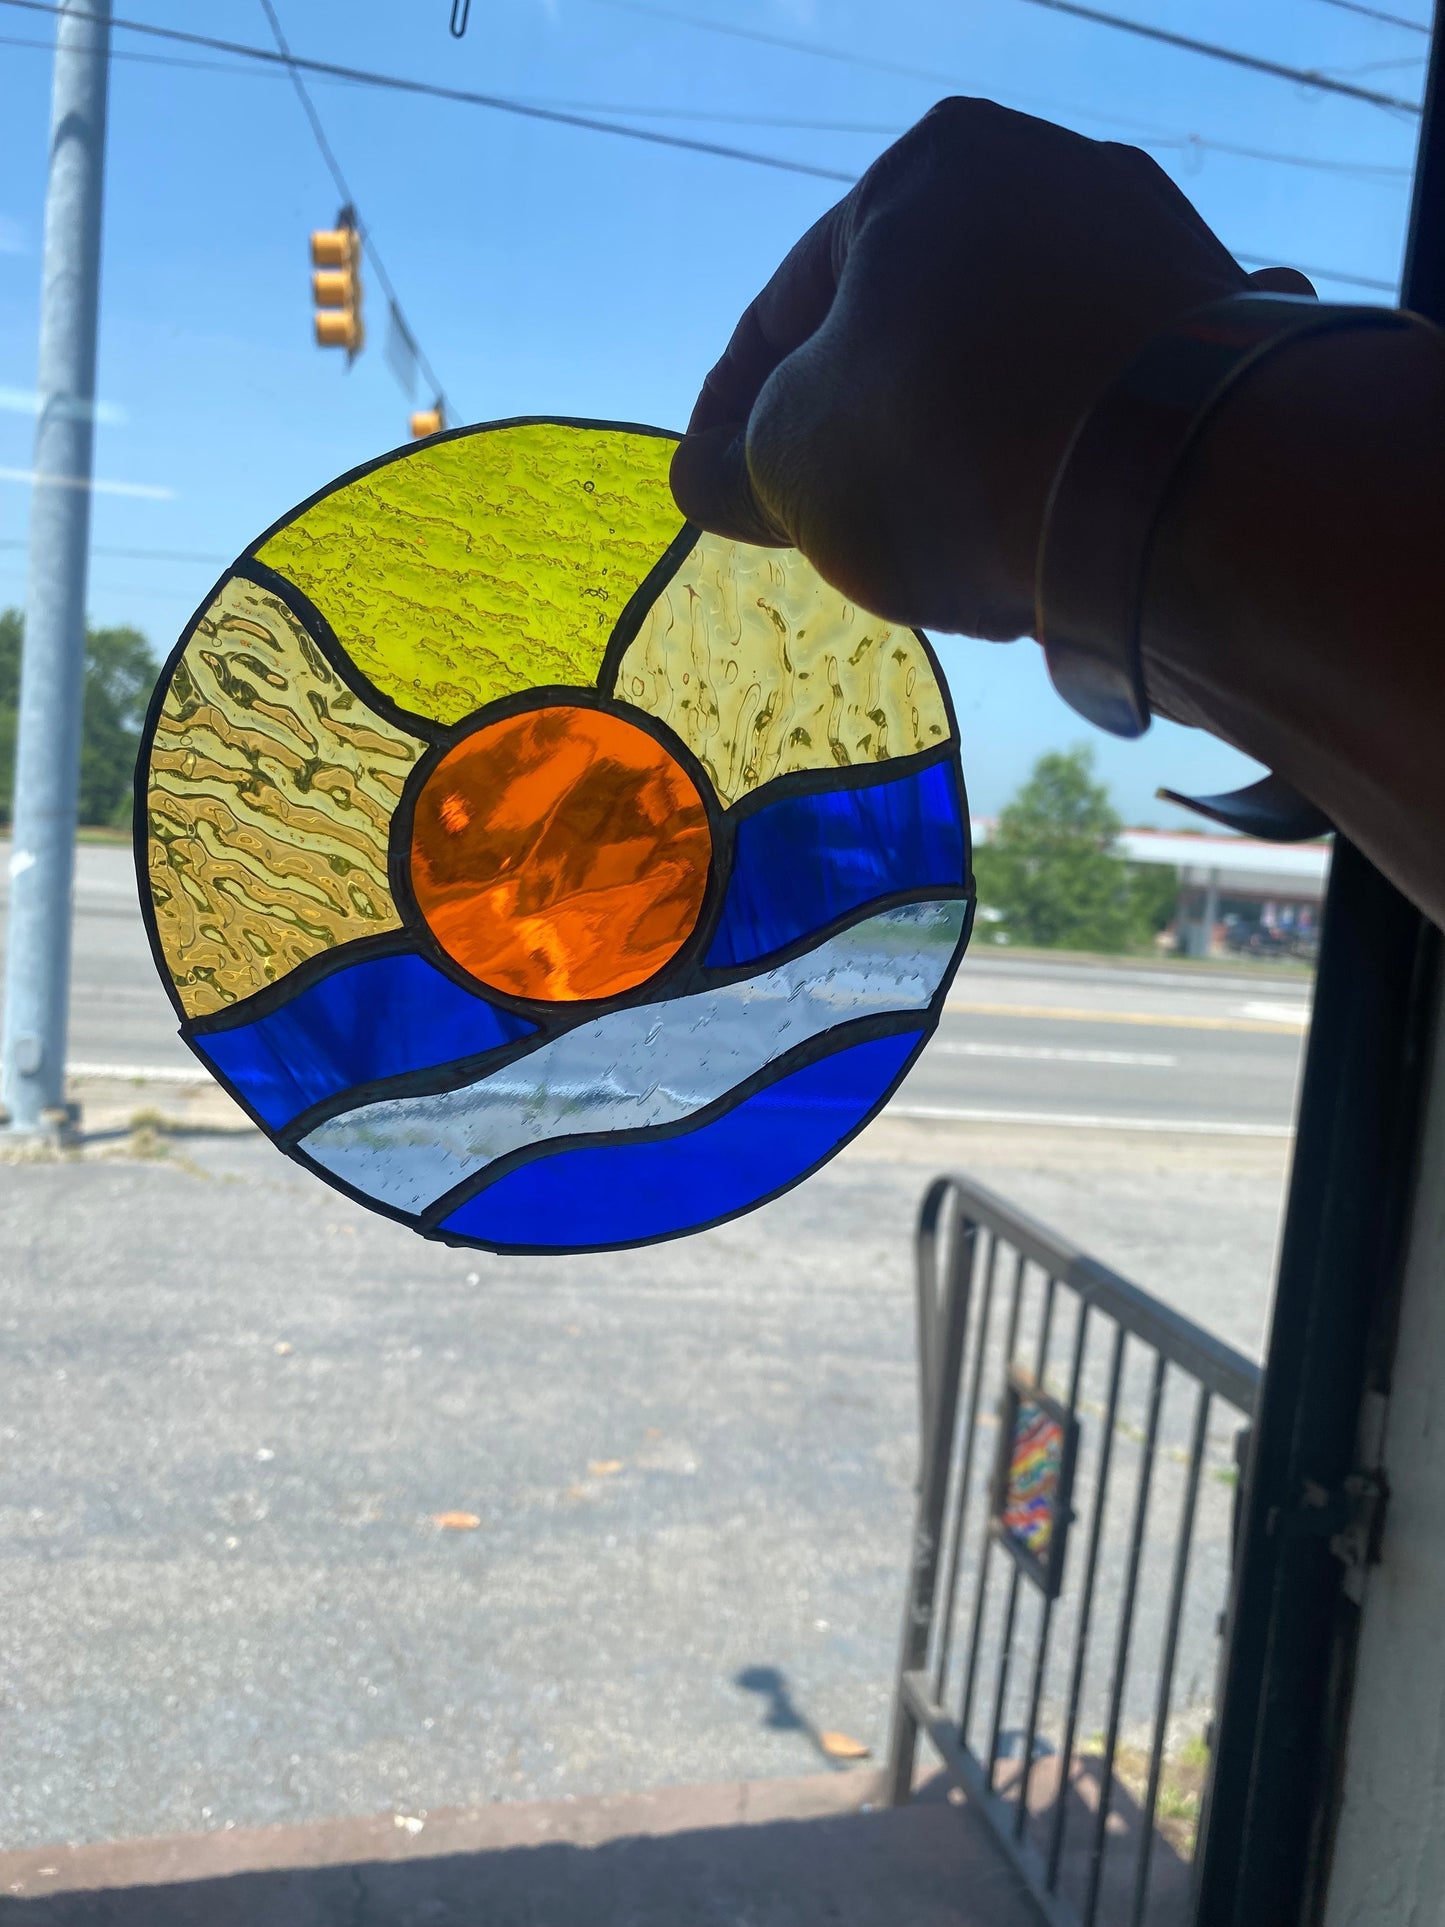 Beginner Stained Glass class, April 11, 4-6:30 pm